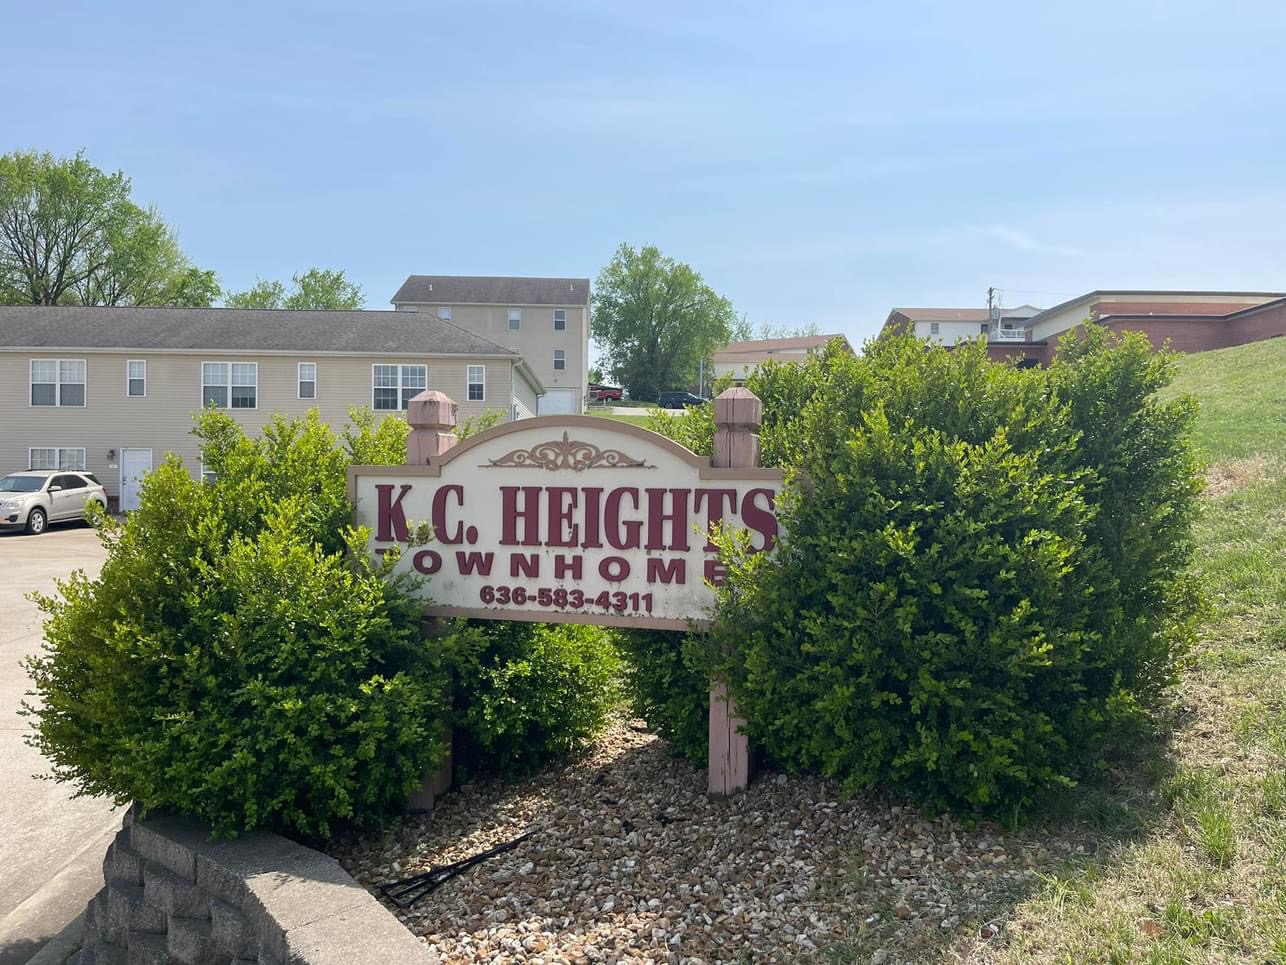 KC Heights Townhomes